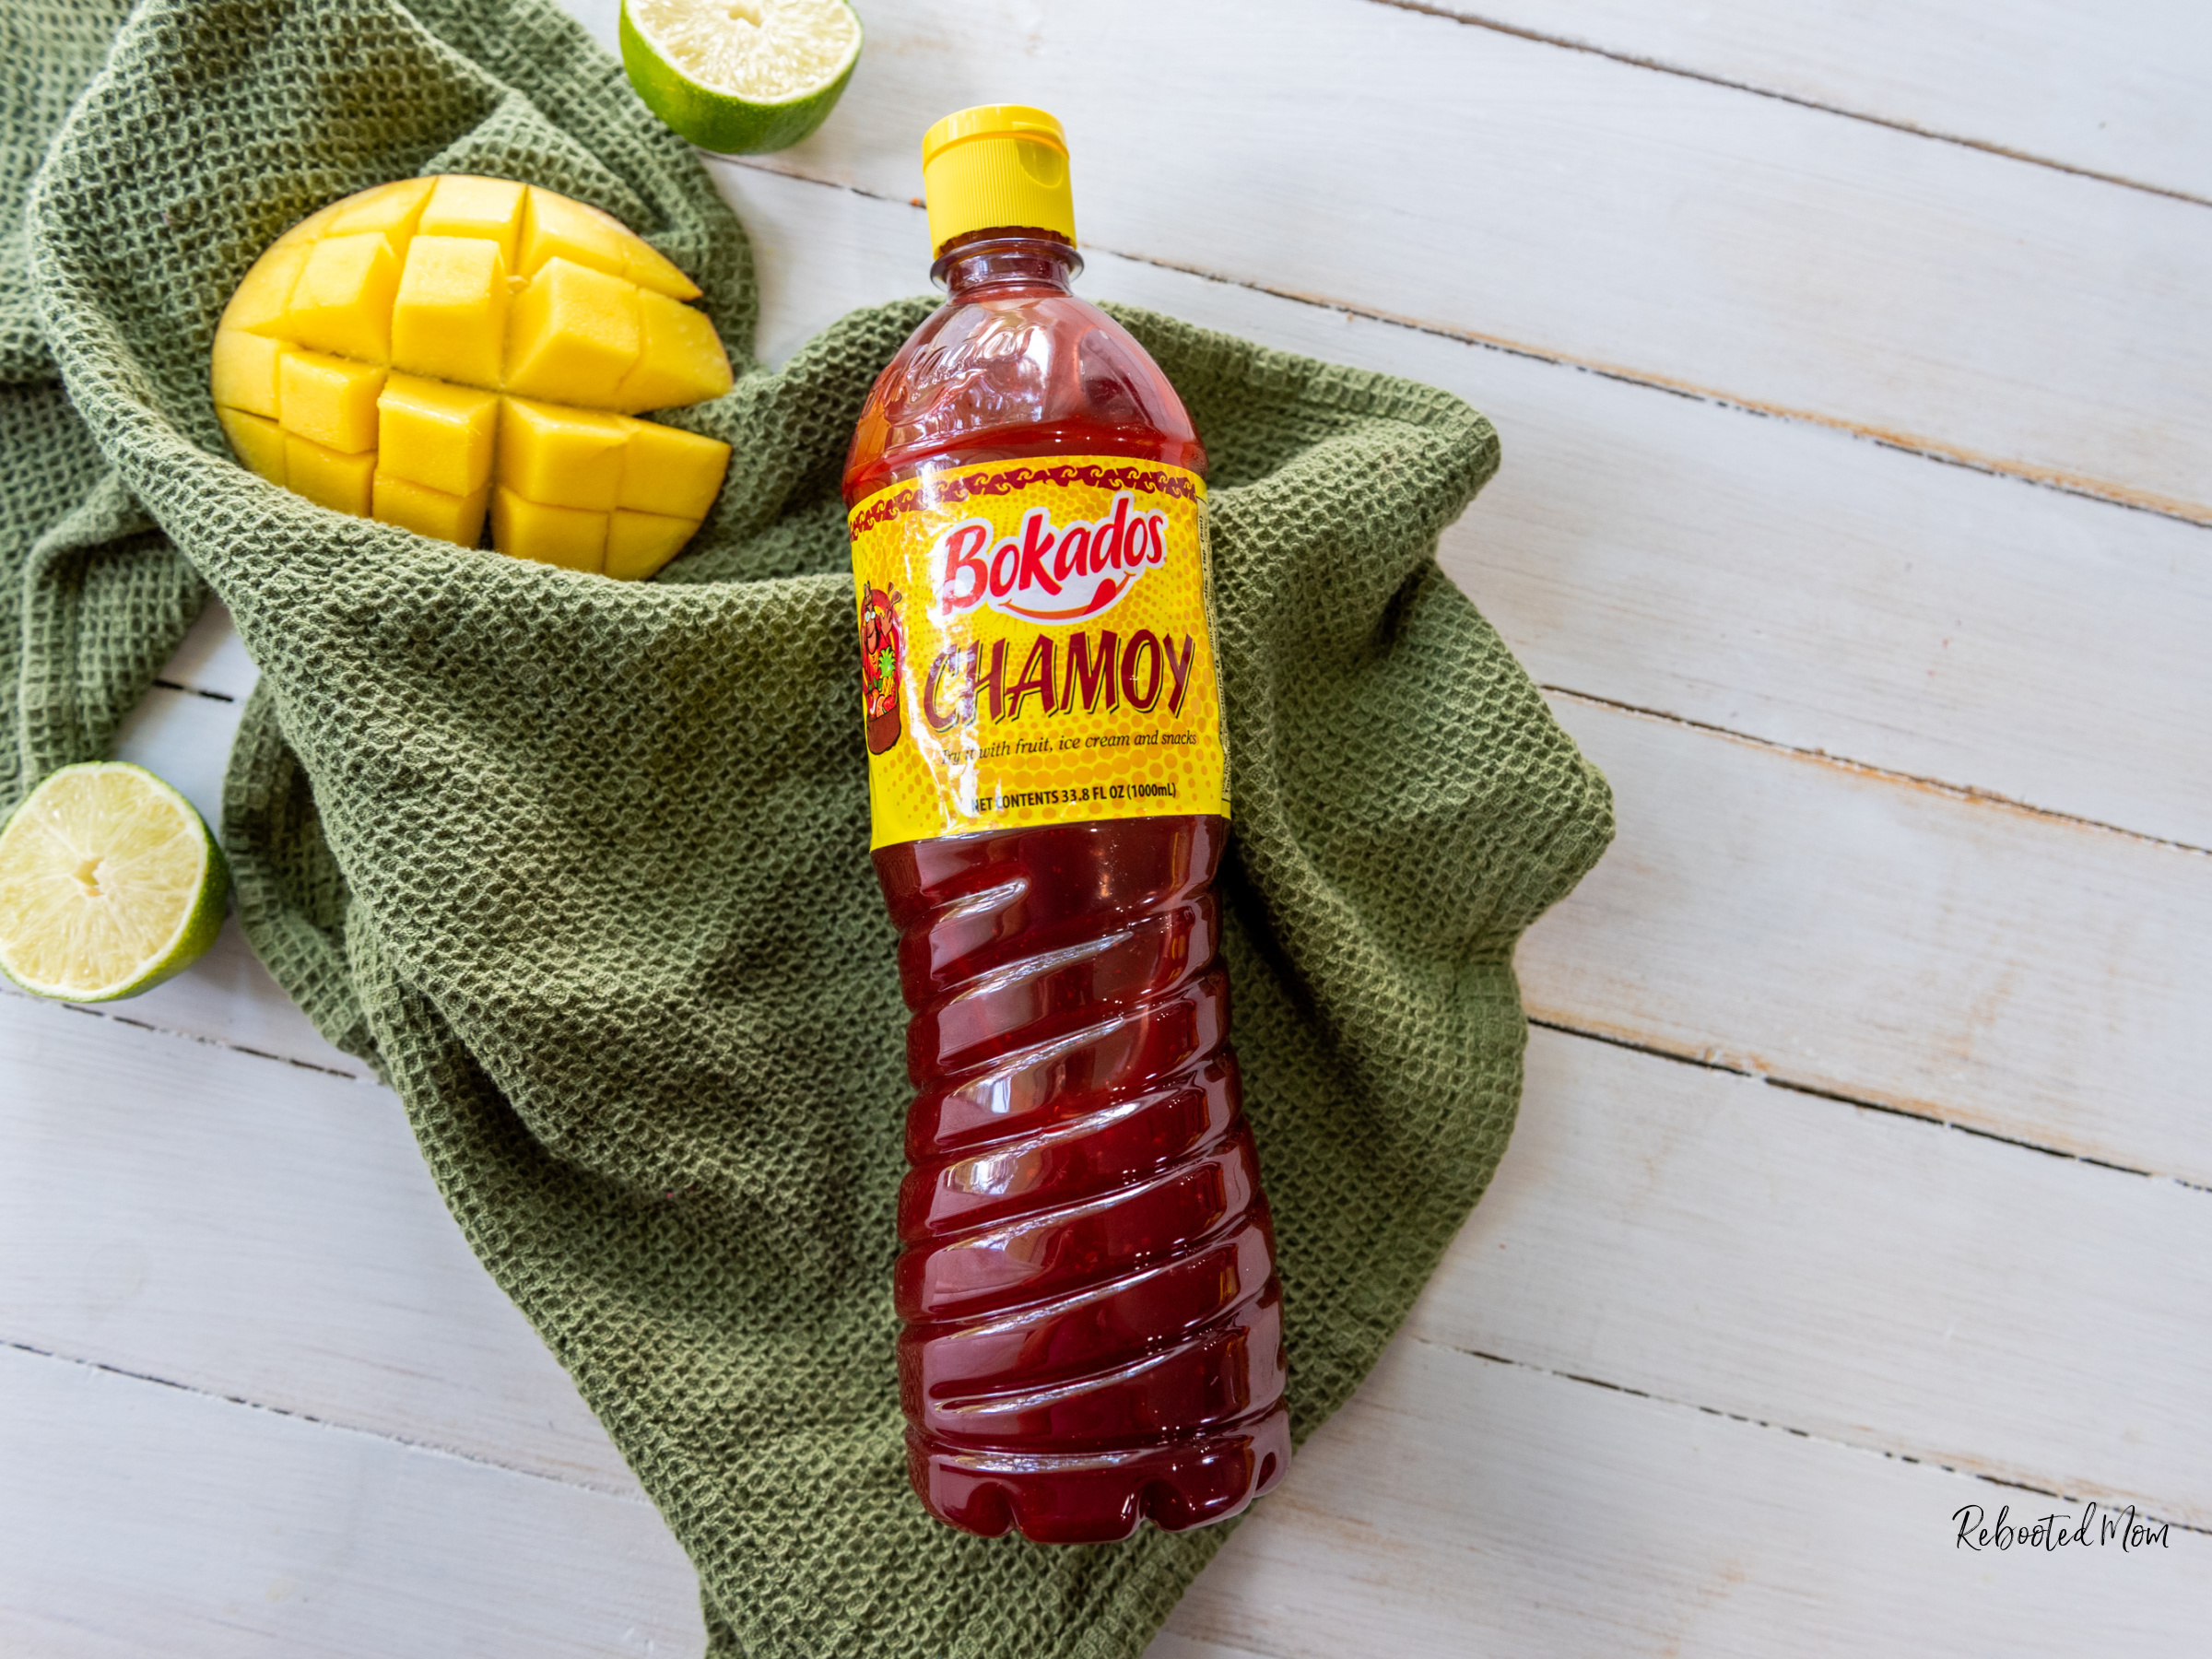 Popular with street vendors and palaterias, a Mangonada (also known as a Chamoyada or Chamango) is a frozen mango drink made with juicy mangoes, chamoy, and chile-lime seasoning.